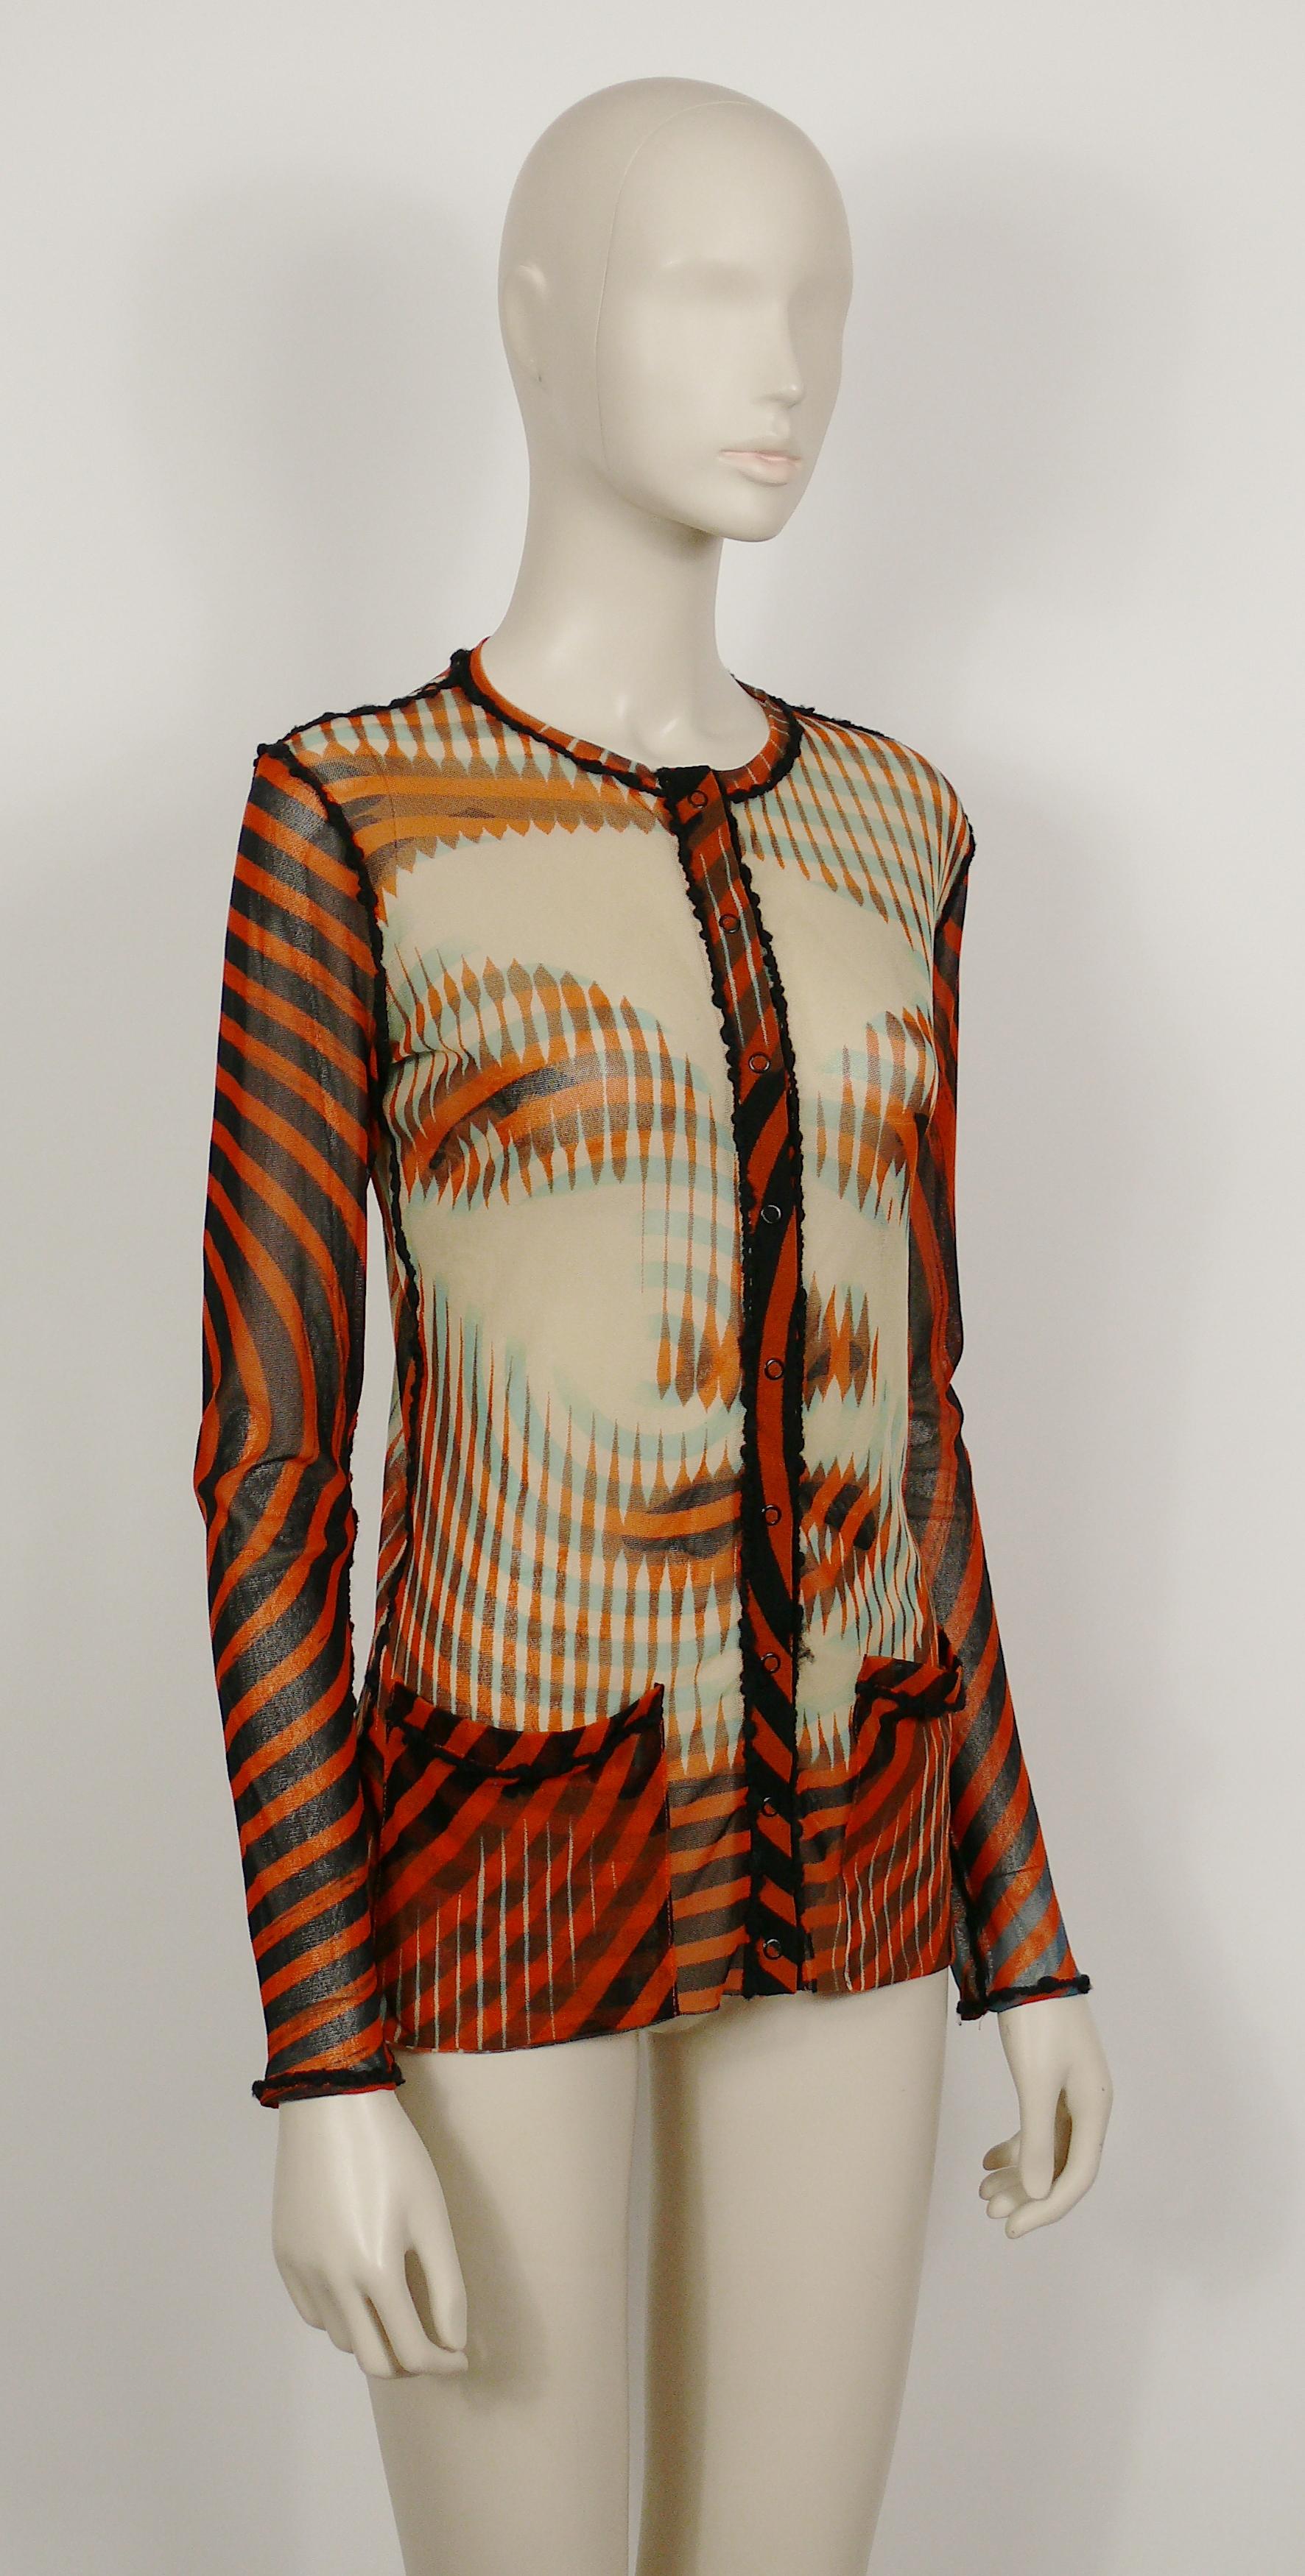 JEAN PAUL GAULTIER vintage sheer mesh cardigan featuring optical illusion MARLENE DIETRICH portraits and kinetic design.

Snap button down closure.
Two pockets.

Label reads JEAN PAUL GAULTIER Maille Femme.
Made in Italy.

Size label reads :